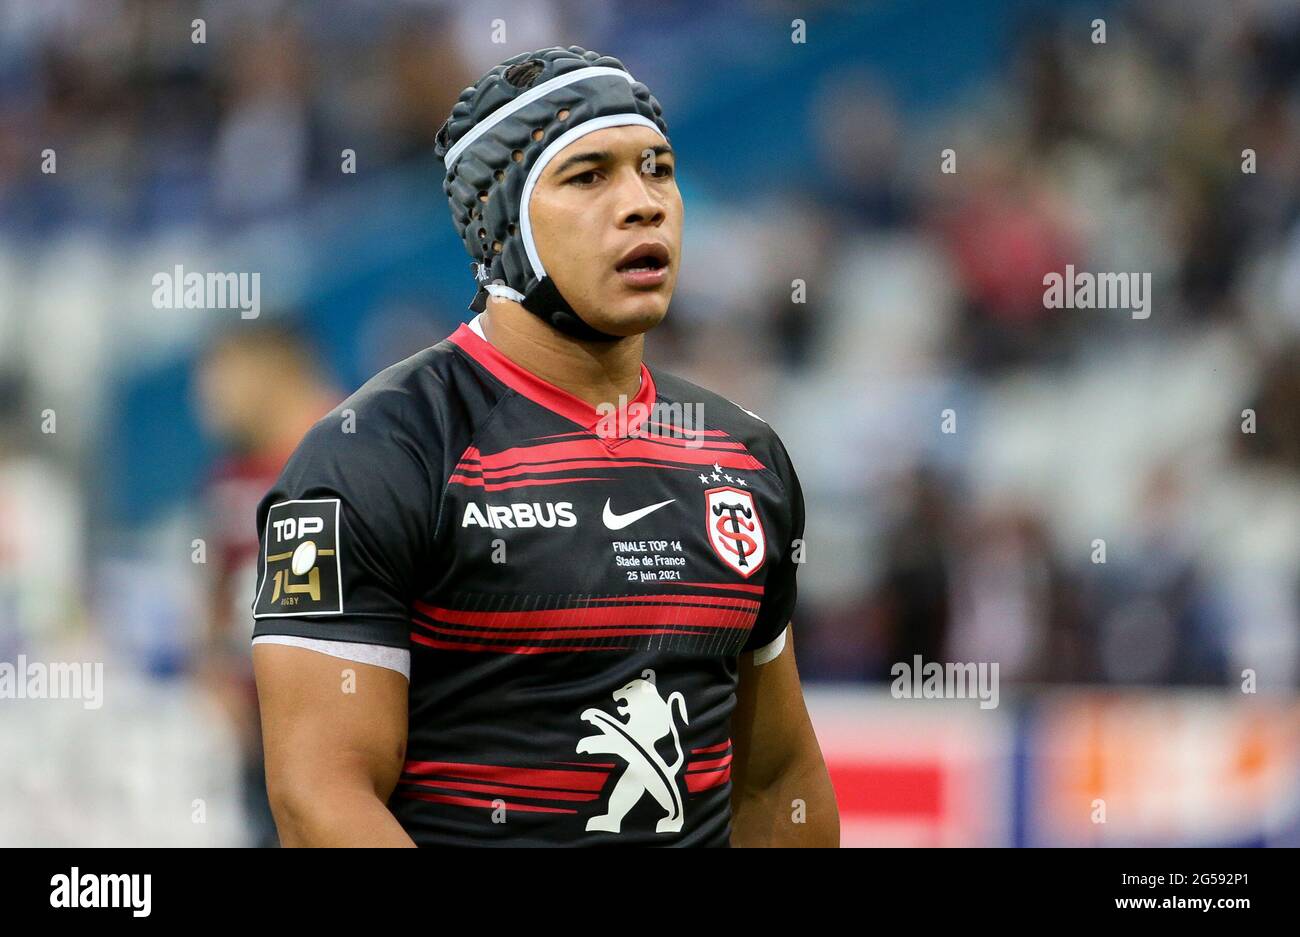 Paris, France. 25th June, 2021. Cheslin Kolbe of Stade Toulousain during  the French rugby championship Top 14 Final between Stade Toulousain  (Toulouse) and Stade Rochelais (La Rochelle) on June 25, 2021 at